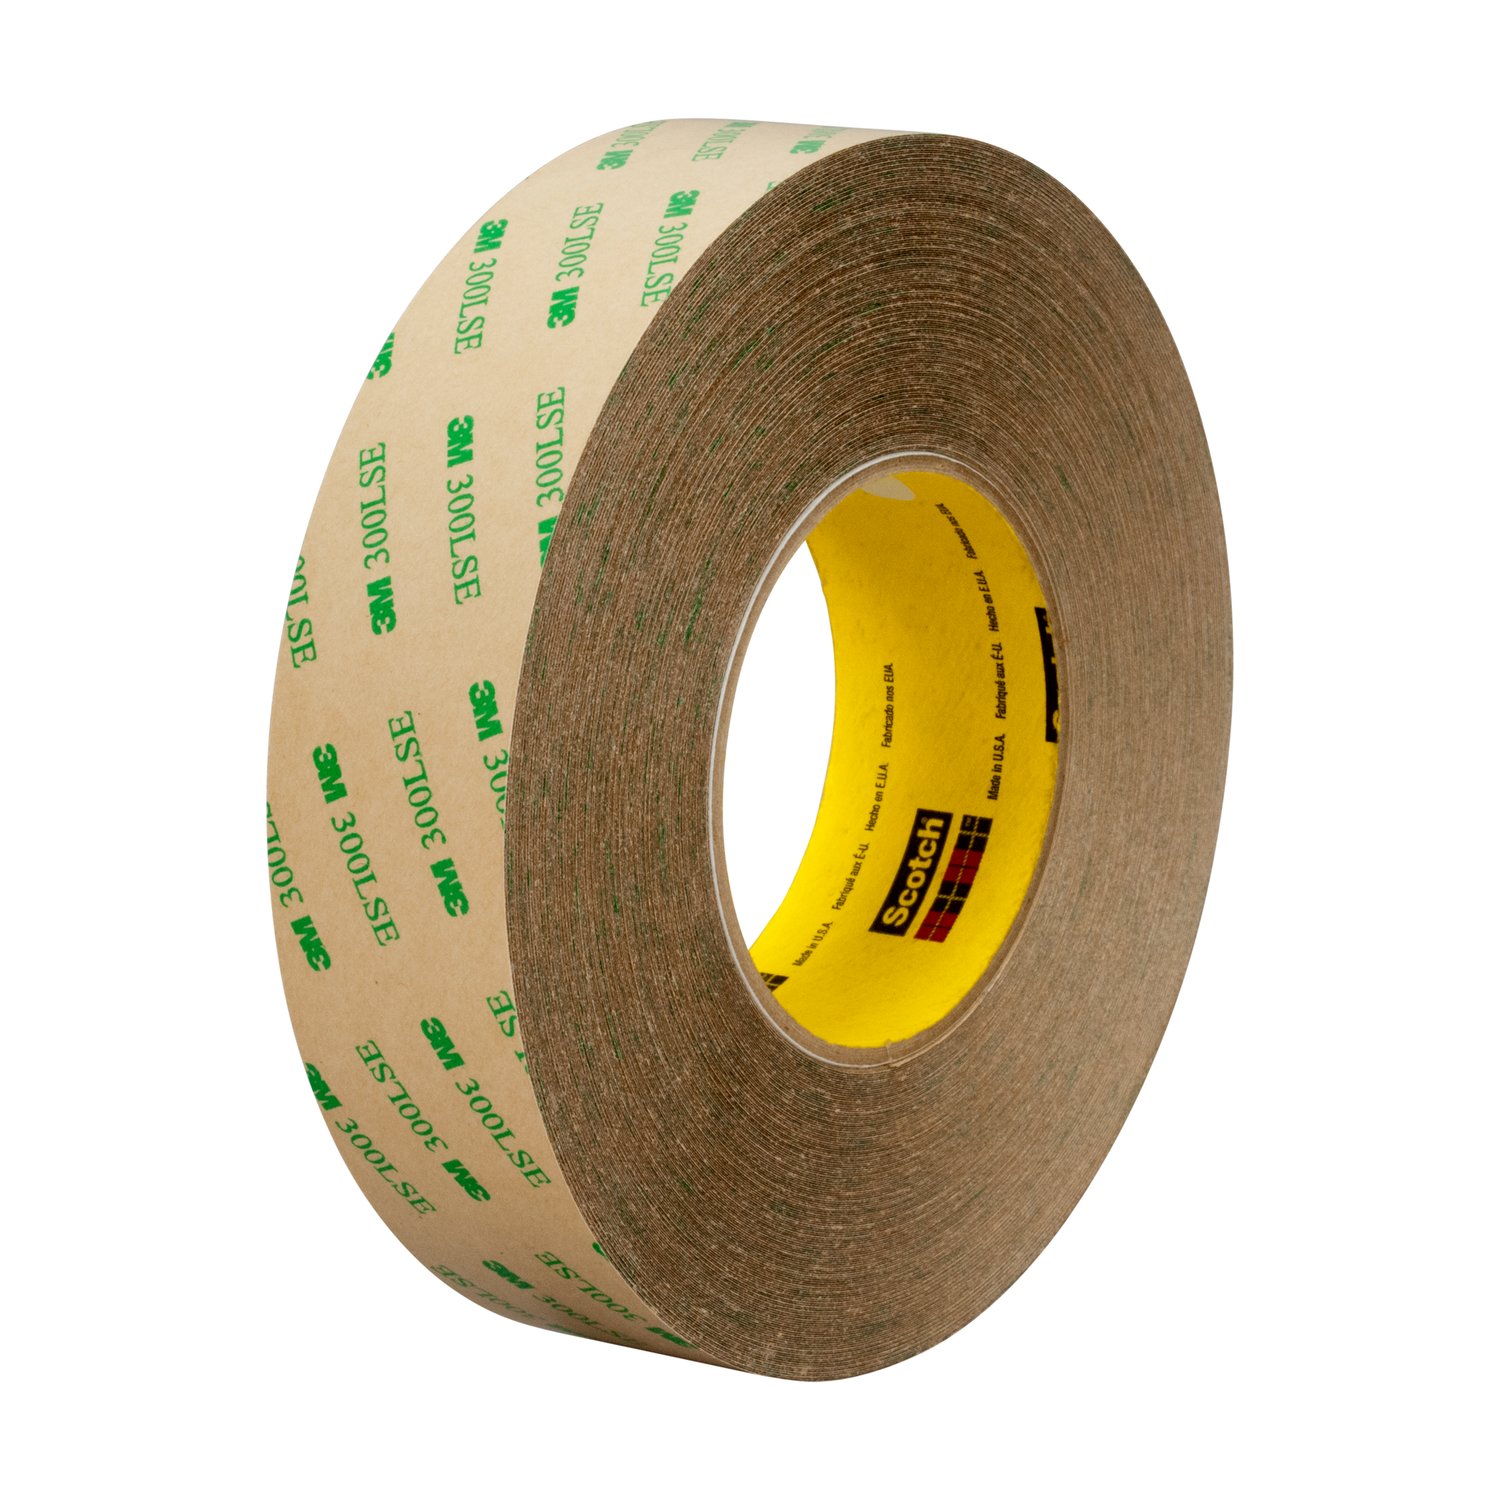 7010292808 - 3M Adhesive Transfer Tape 9672LE, Clear, 24 in x 180 yd, 5 mil, 1 roll
per case